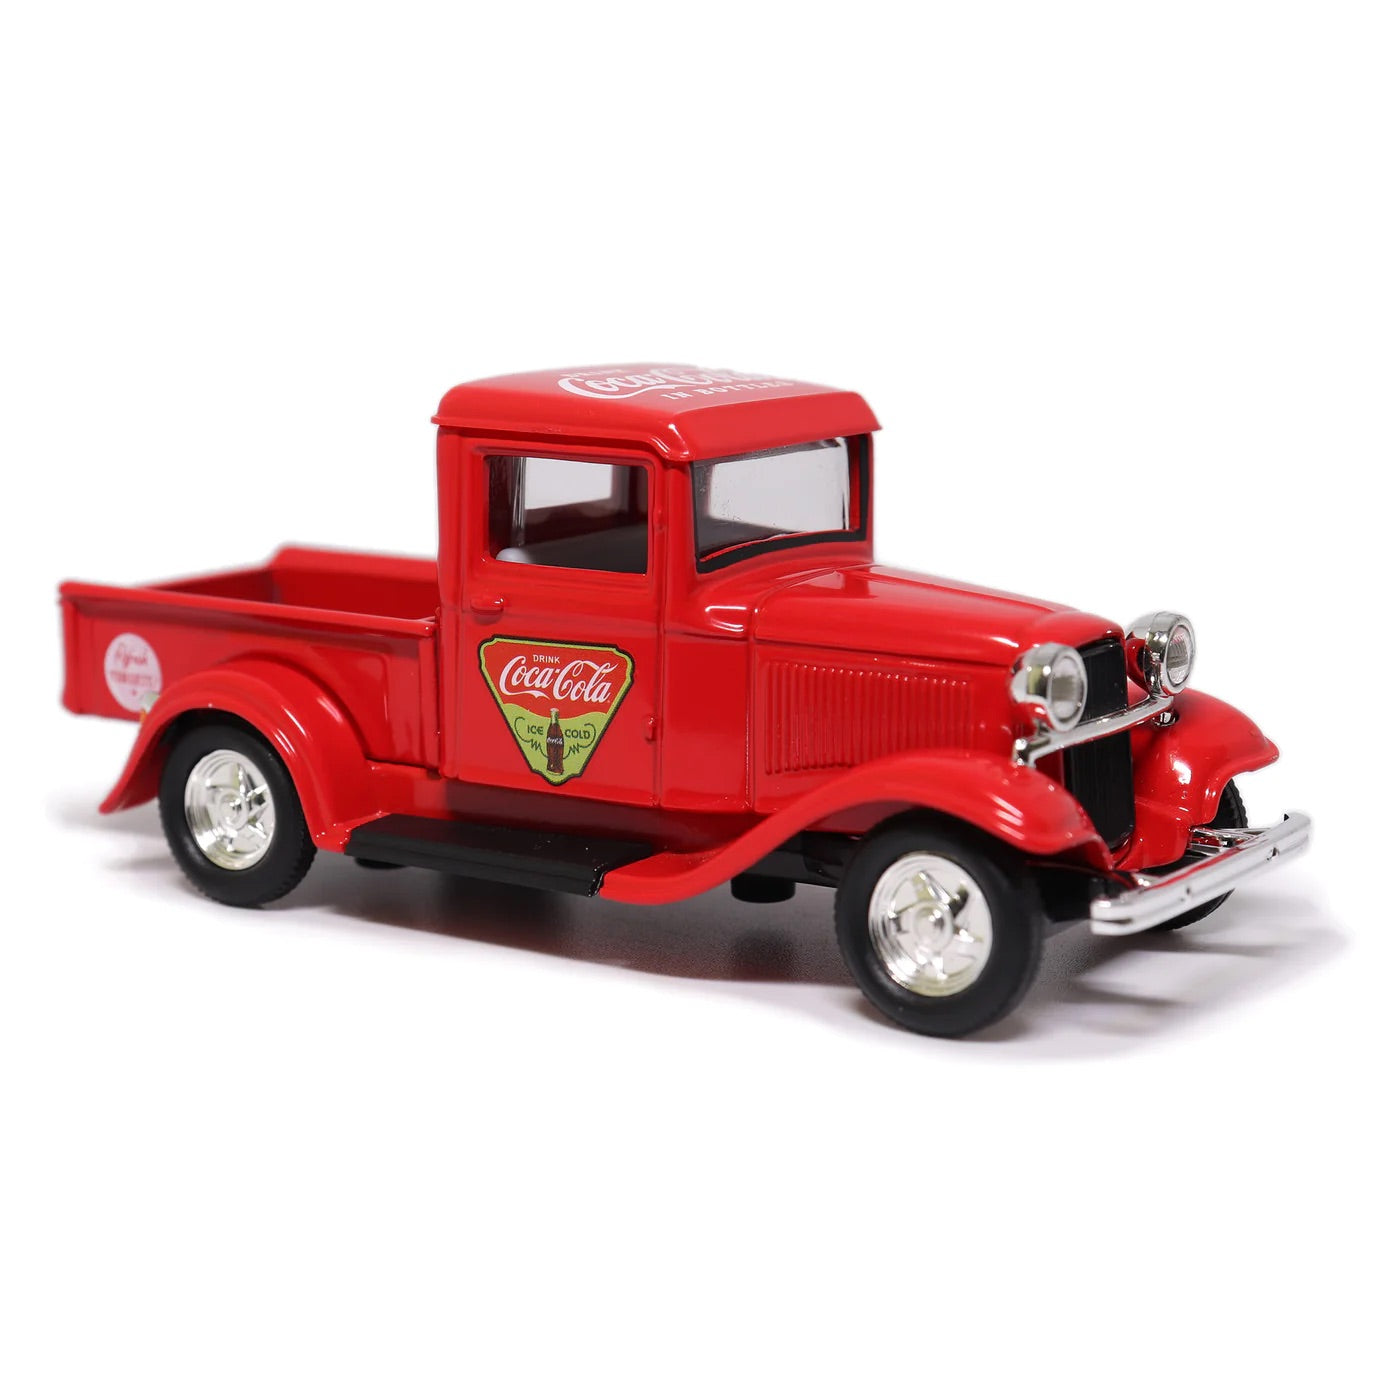 1934 Coca Cola Ford Pick-Up "Refresh Your Guests"